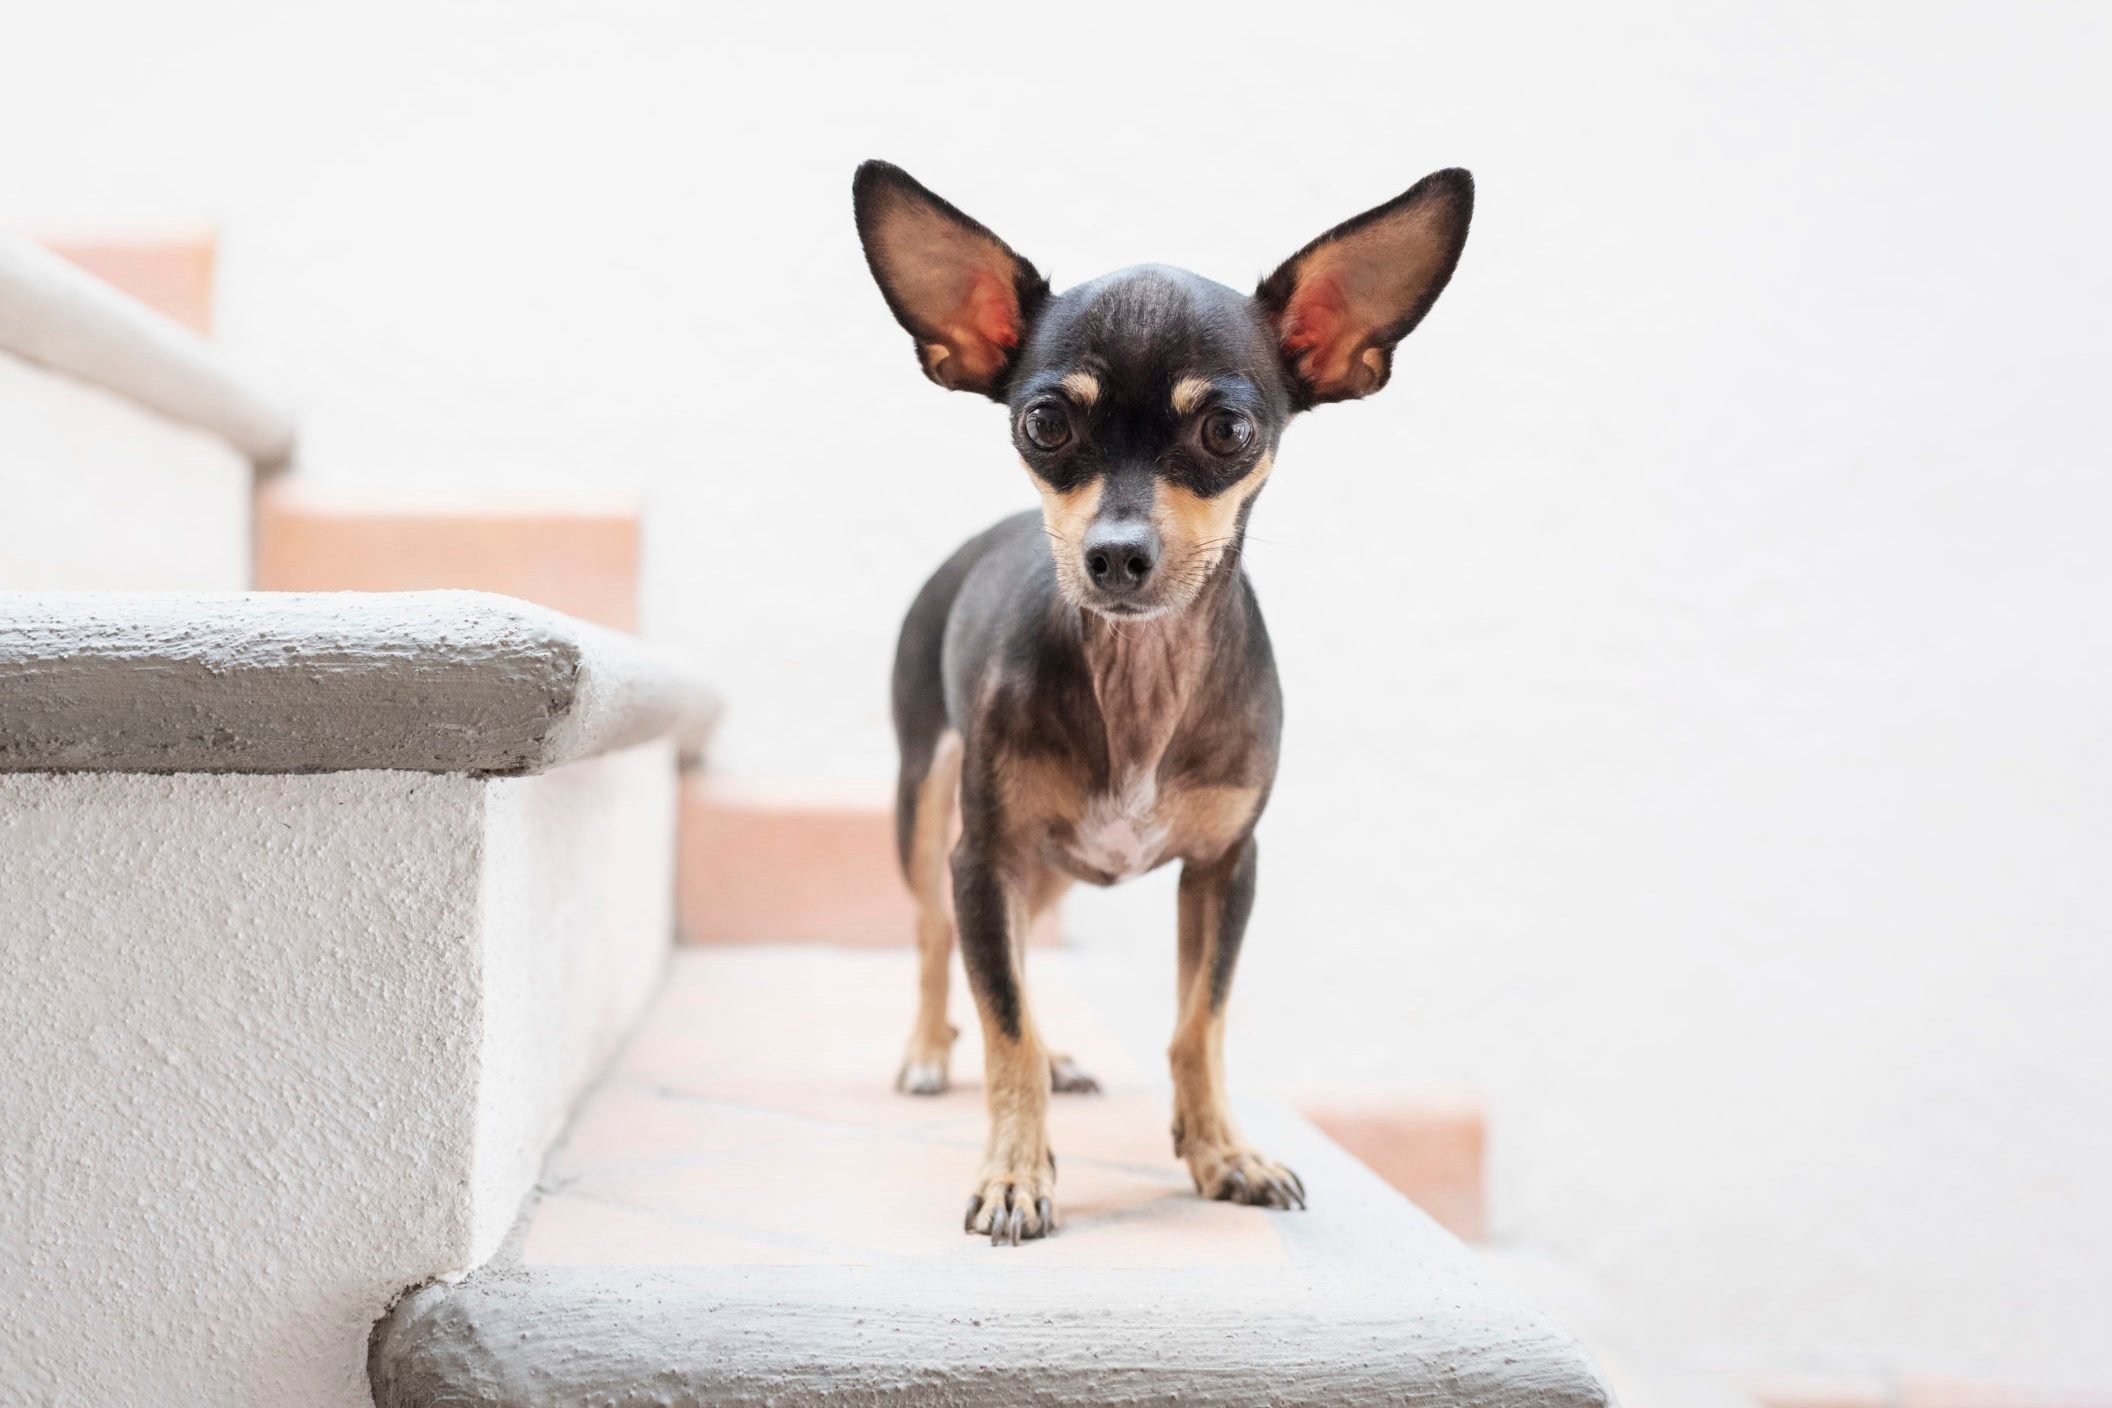 Chihuahua standing on stairs looking at camera